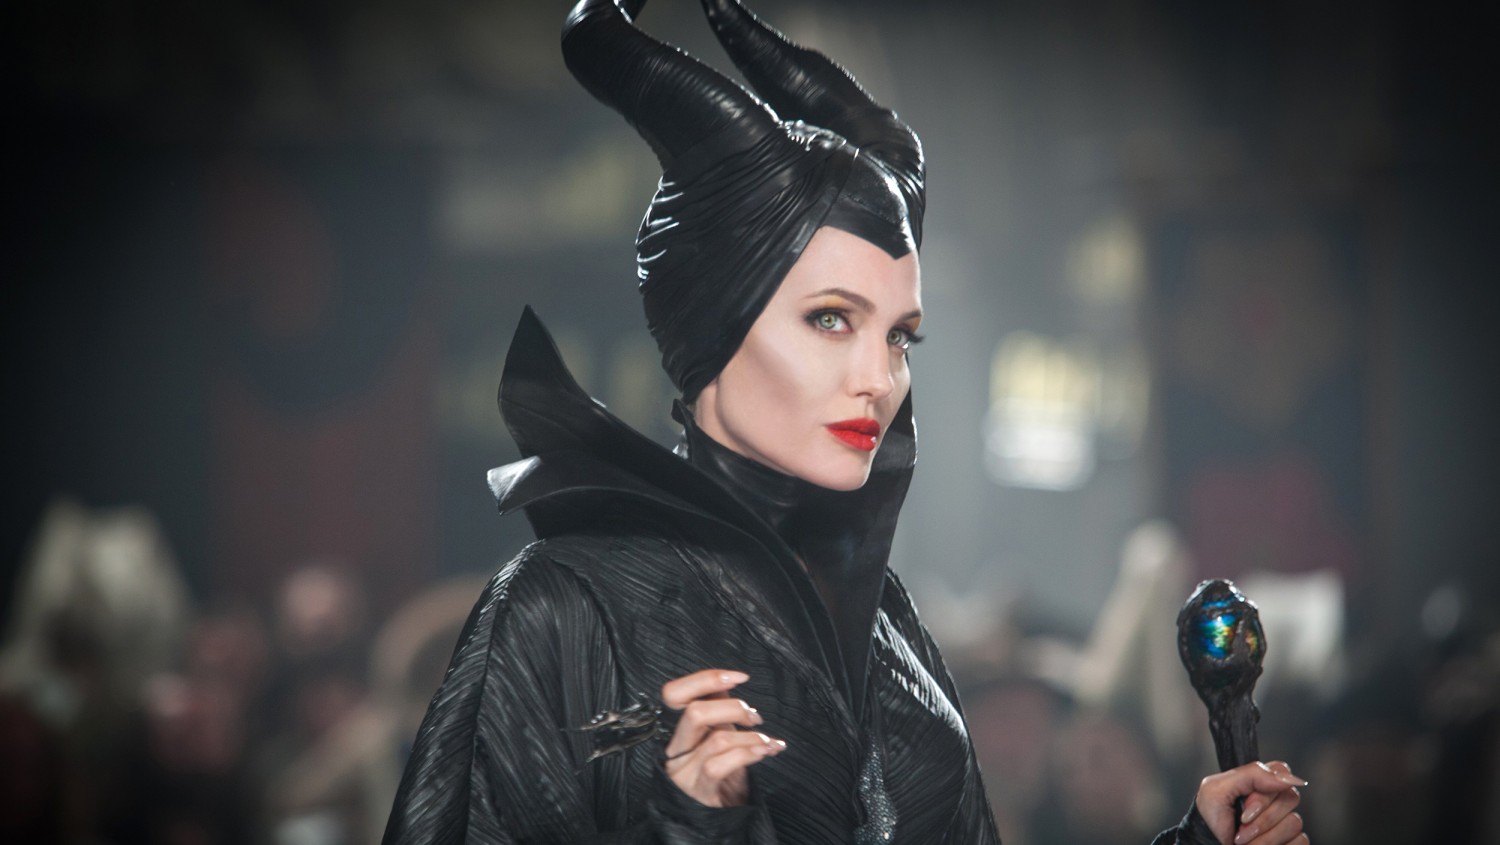 Parents' guide: 'Maleficent' will enchant most kids, despite scary ...